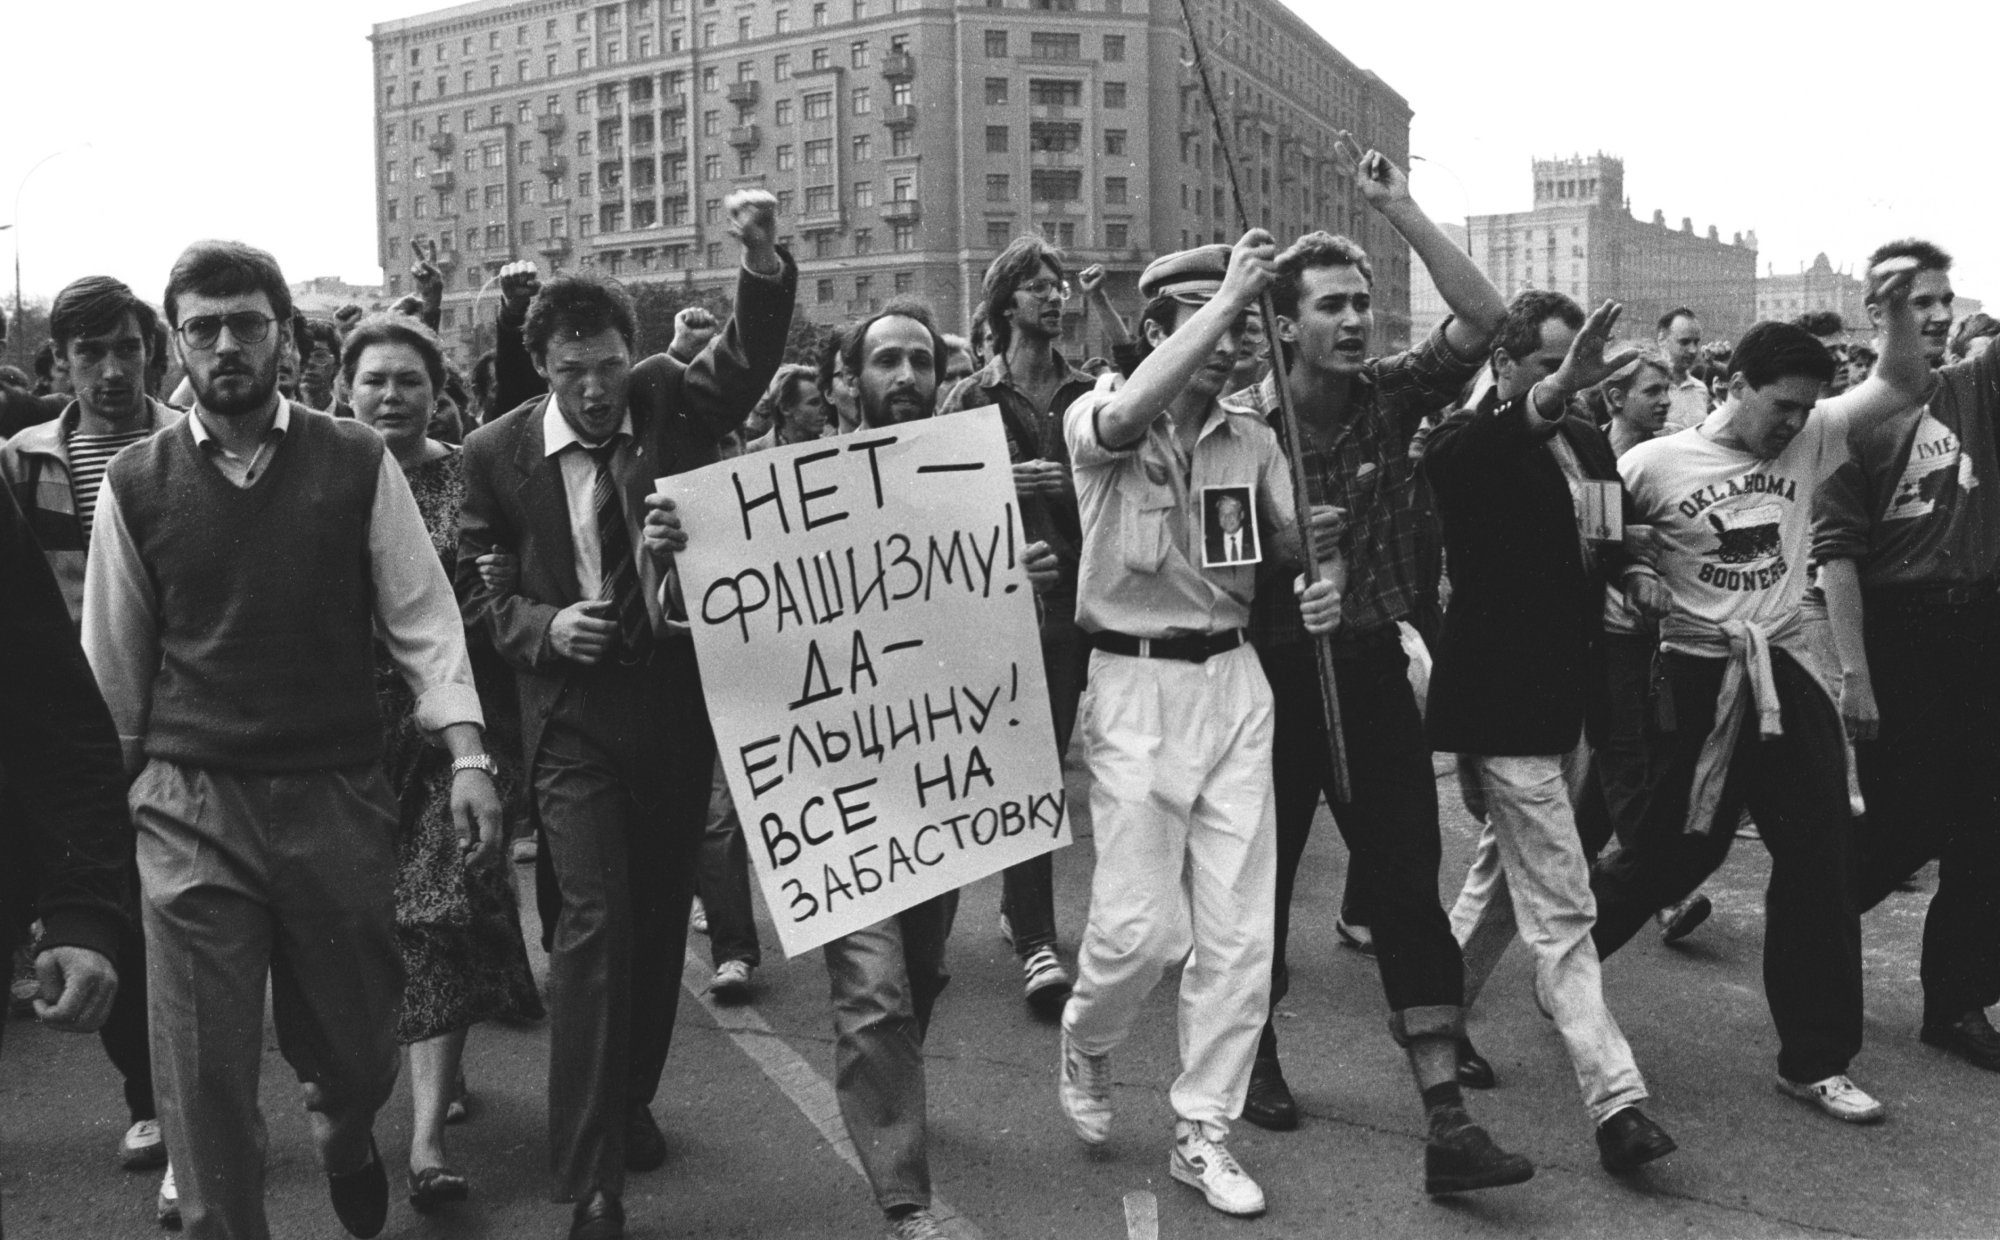 People march towards the White House on Aug. 19, 1991. The sign reads "No to Facism! Yes to Yeltsin! All on Strike!"